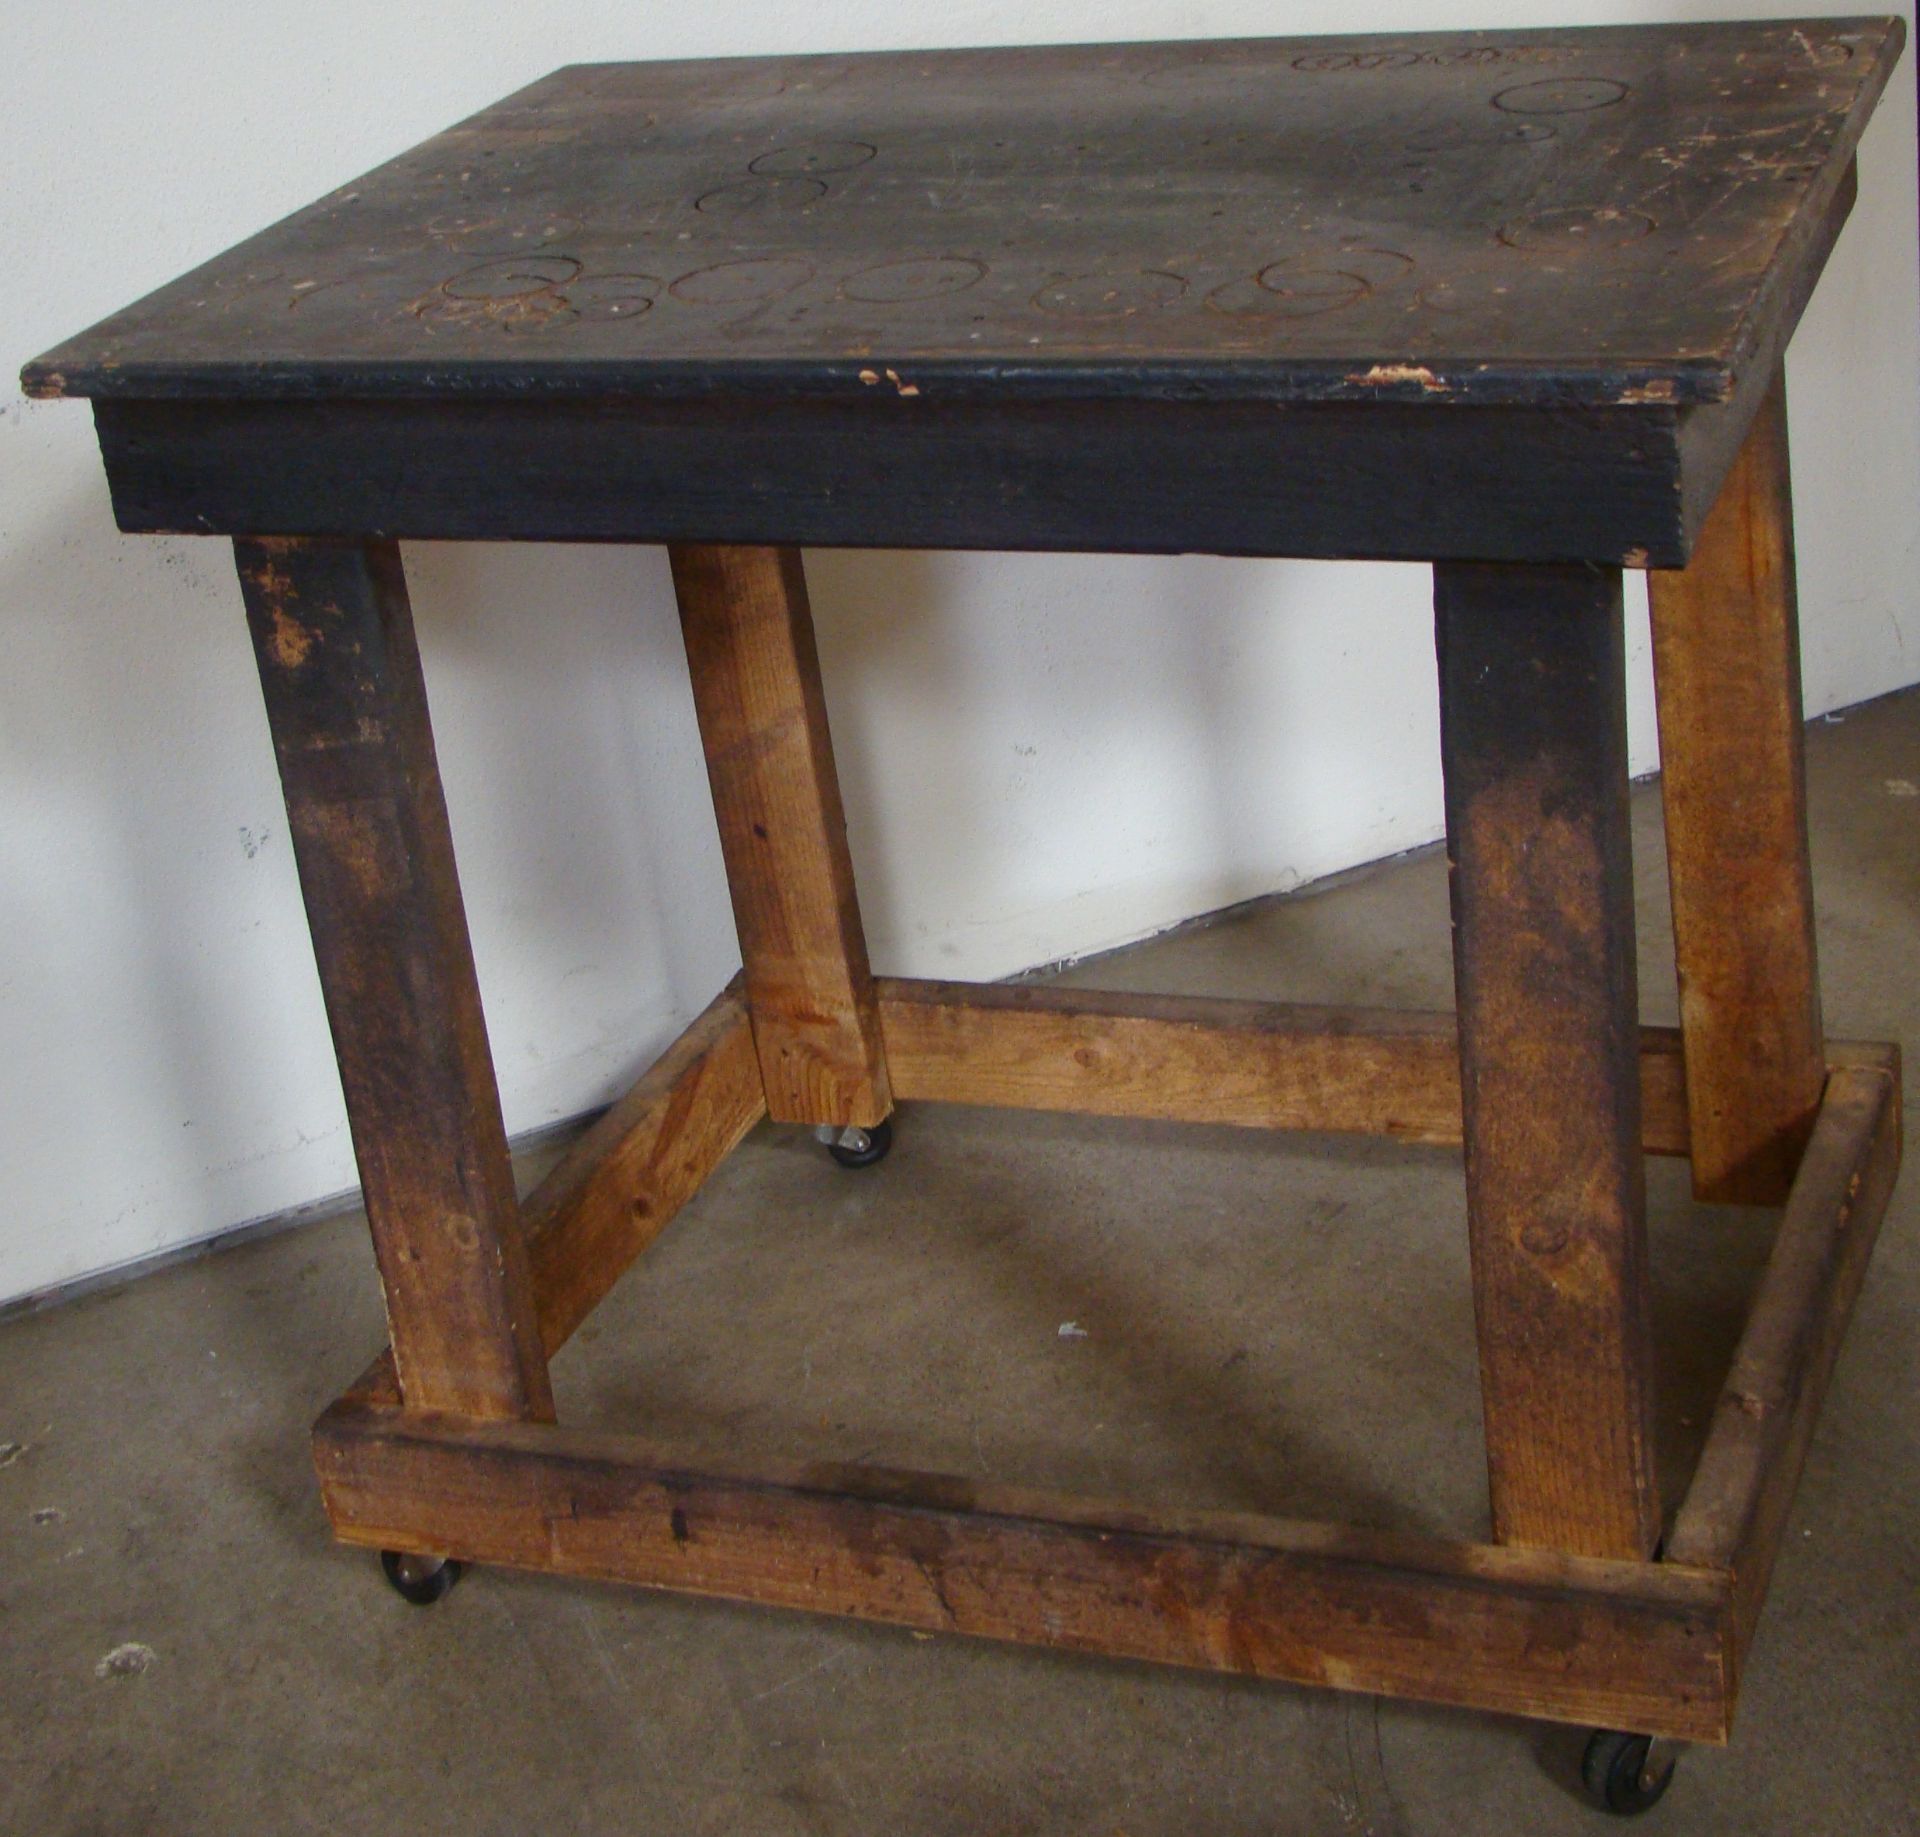 2 - Wooden Rolling Tables 33" h x 26" d x 35" w - Image 2 of 3